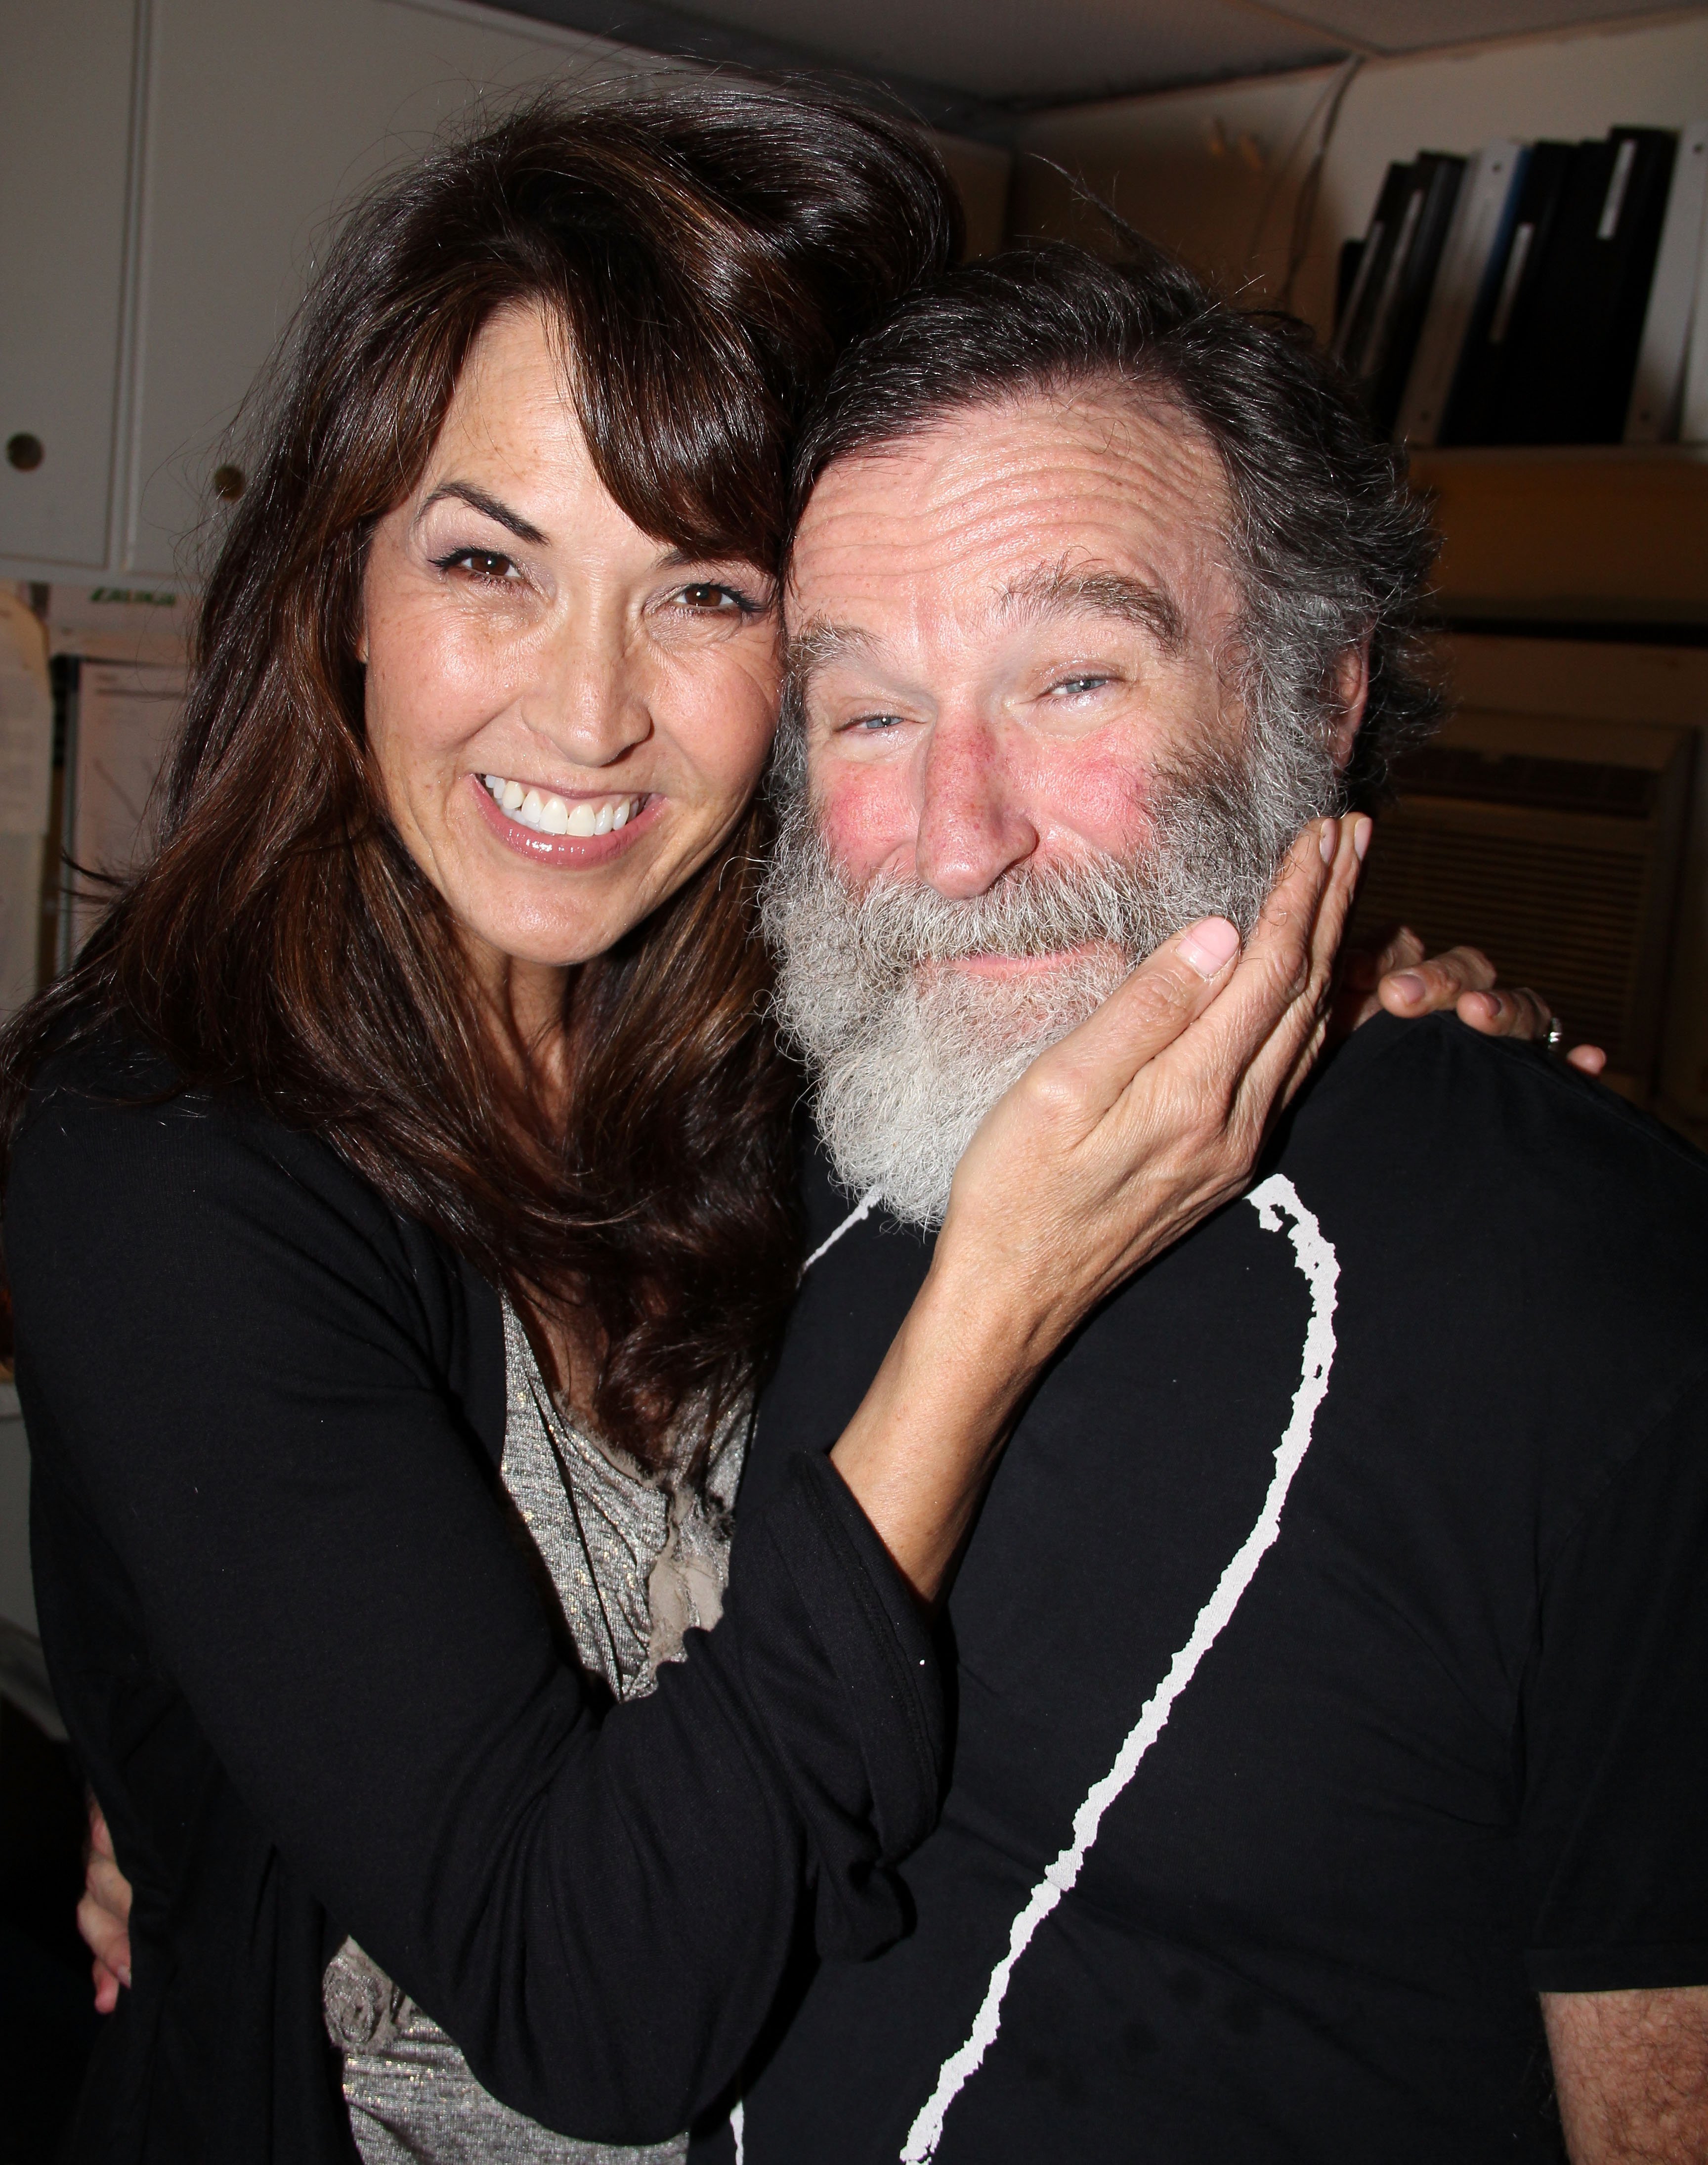 Susan Schneider and Robin Williams pose backstage at the hit play "Bengal Tiger at The Baghdad Zoo" on Broadway at The Richard Rogers Theater on June 15, 2011 in New York City | Source: Getty Images